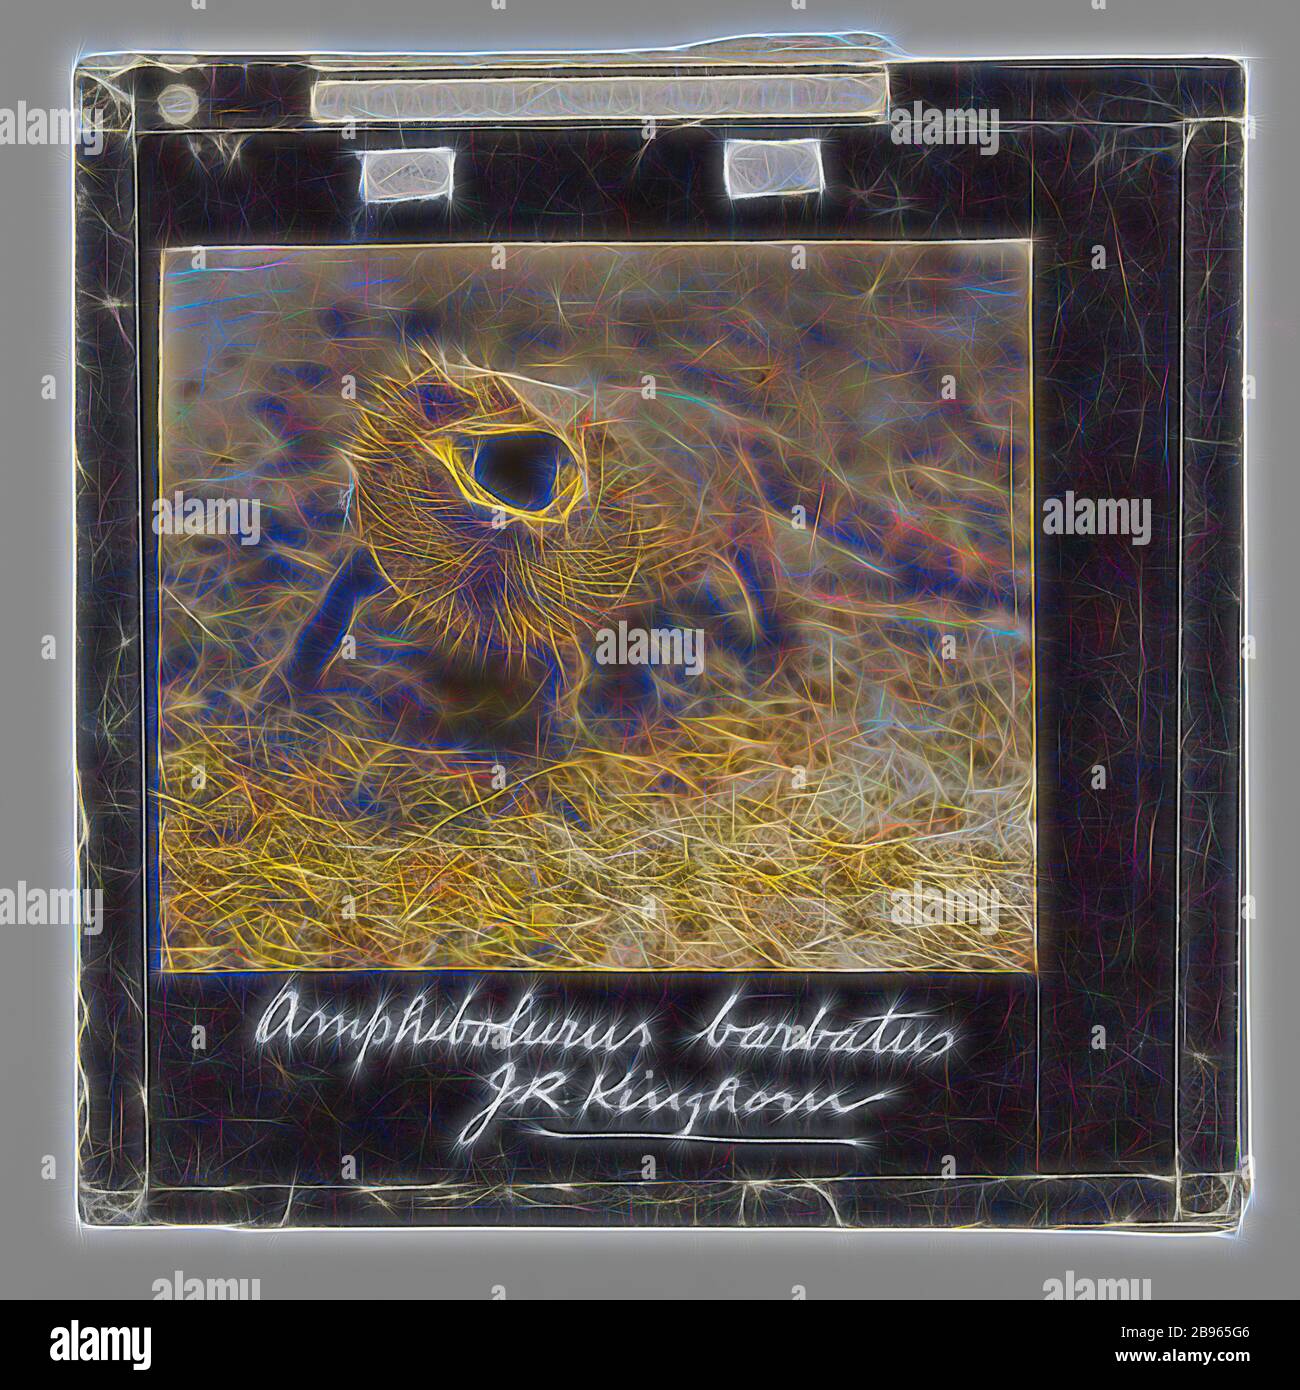 Lantern Slide - 'Amphibolurus Barbatus', 1920-1940, Coloured lantern slide depicting a bearded dragon ( Amphibolurus Barbatus). Image by J. R. Kinghorn, (1891-1983), zoologist, museum curator and broadcaster. Kinghorn was employed at the Australian Museum in Sydney between 1907-1956., Reimagined by Gibon, design of warm cheerful glowing of brightness and light rays radiance. Classic art reinvented with a modern twist. Photography inspired by futurism, embracing dynamic energy of modern technology, movement, speed and revolutionize culture. Stock Photo